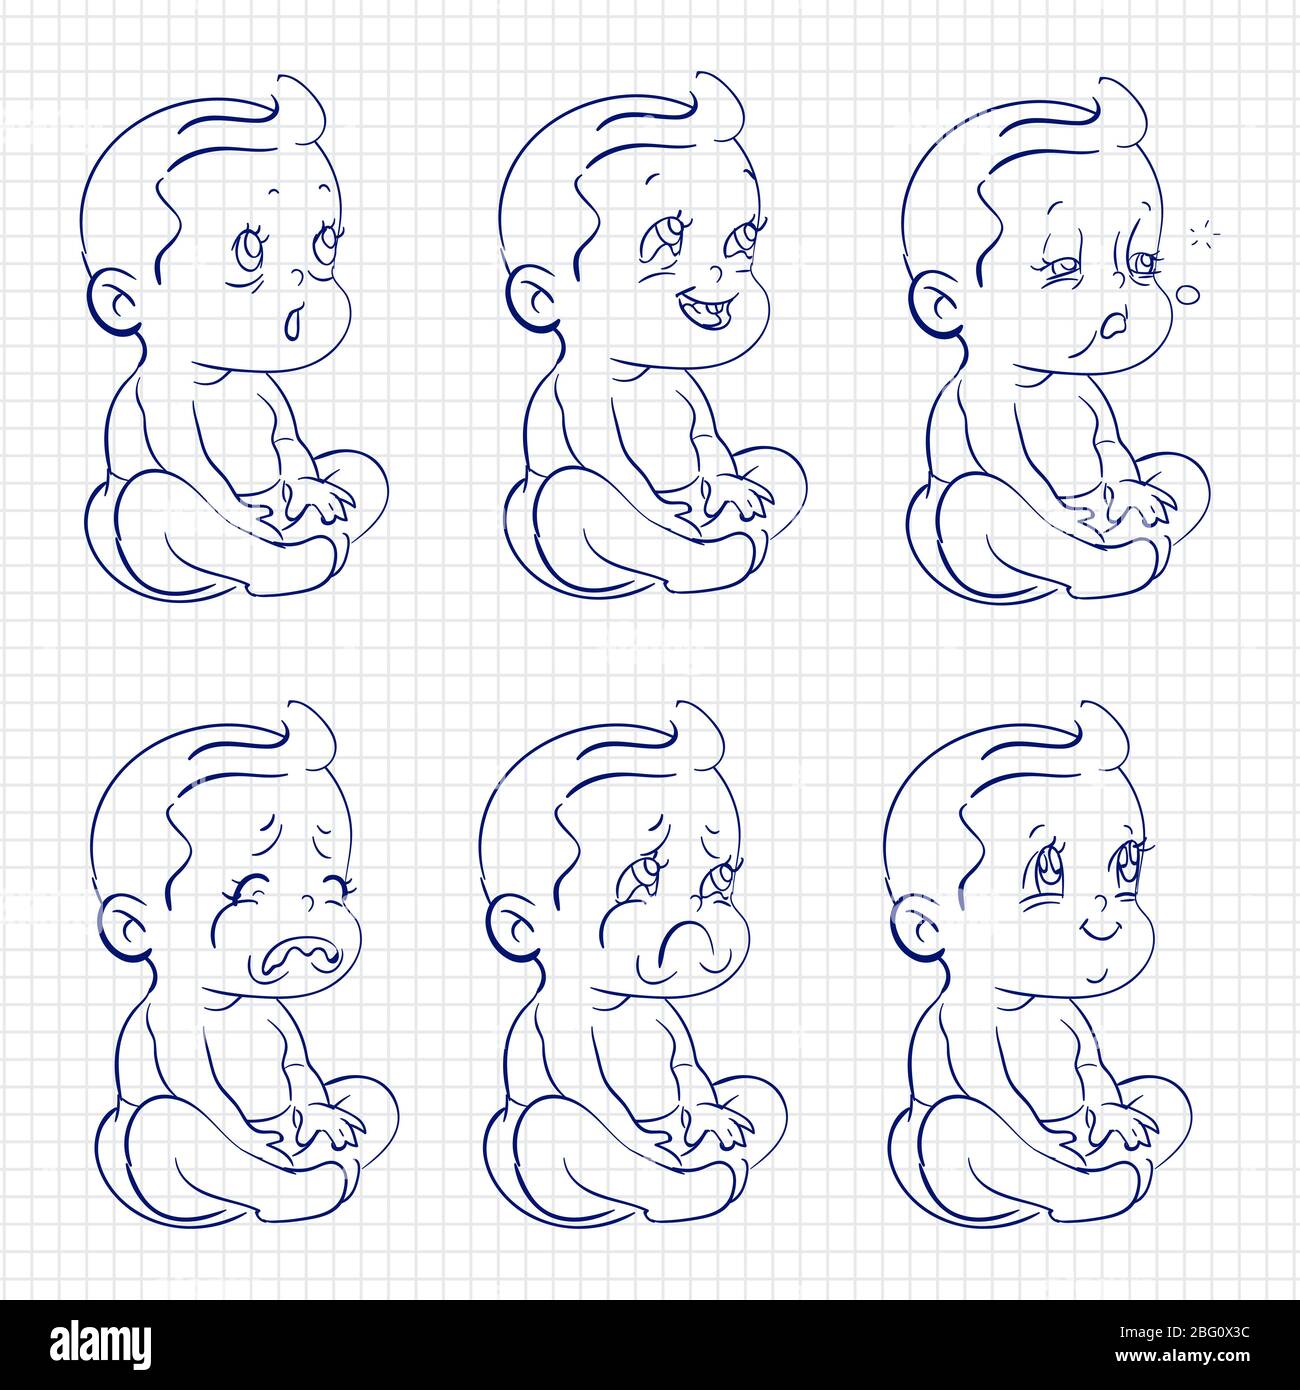 Baby Socks Sketch Icon Stock Illustration - Download Image Now